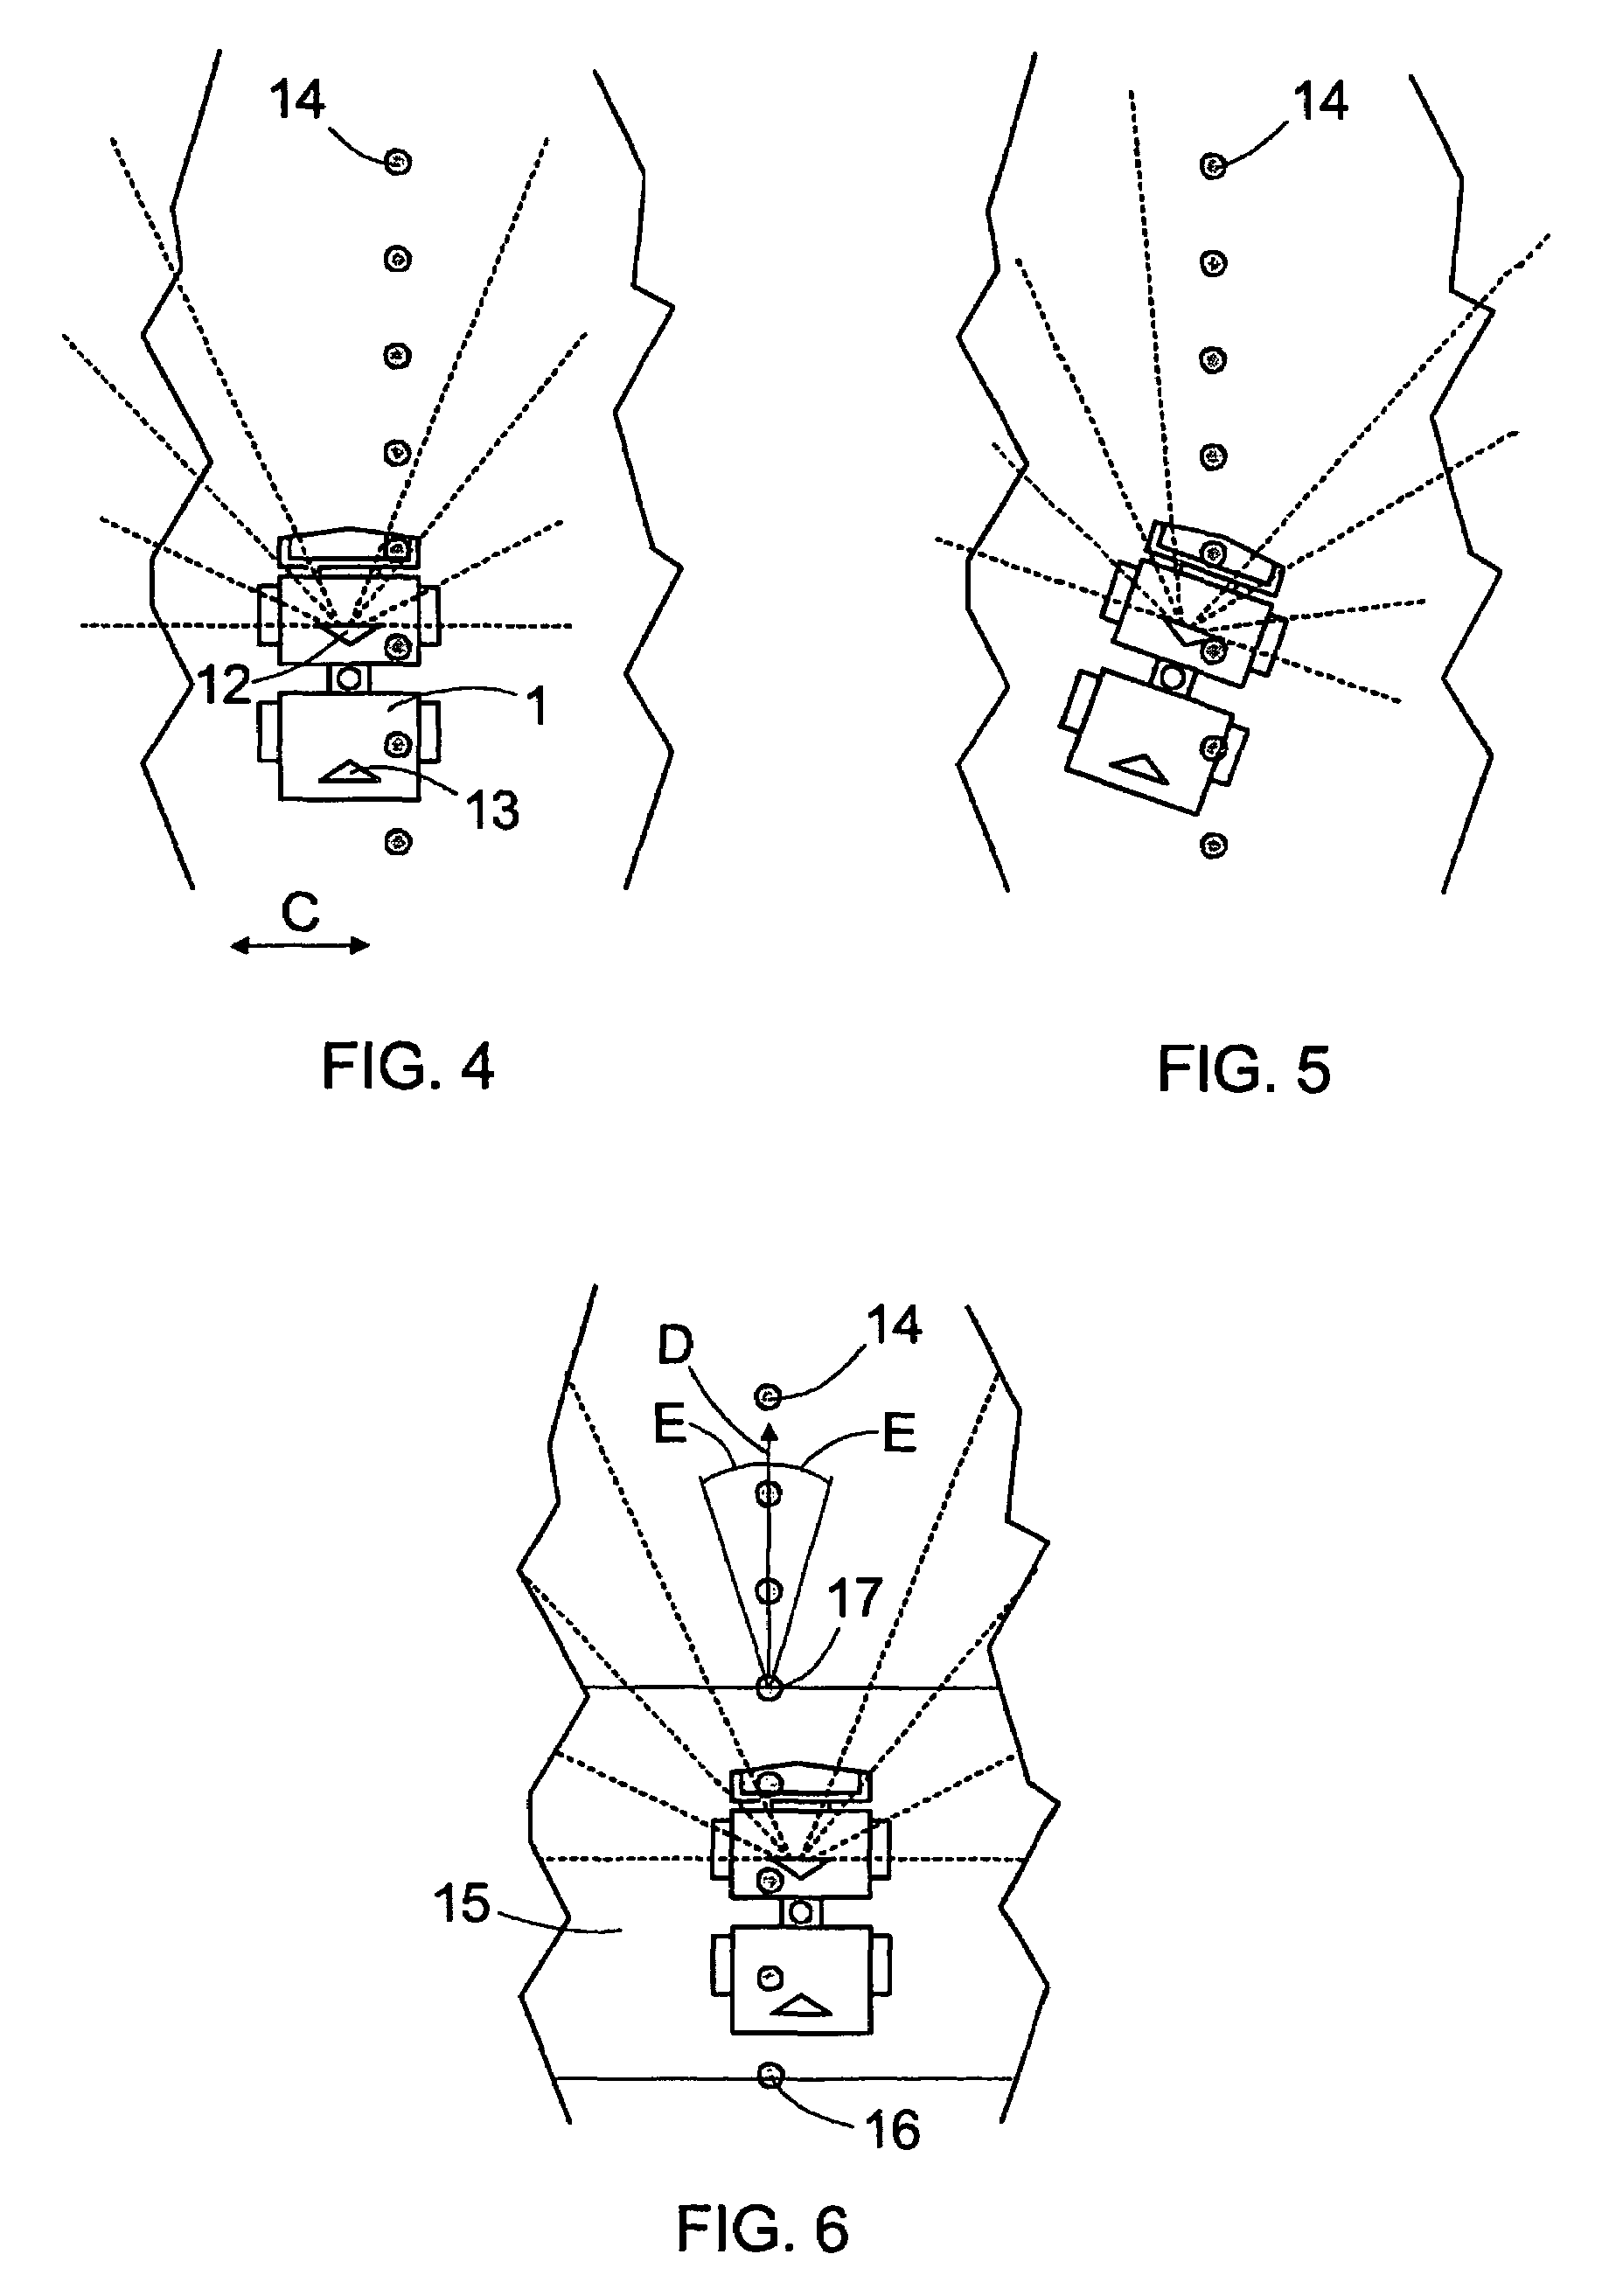 Initializing position and direction of mining vehicle